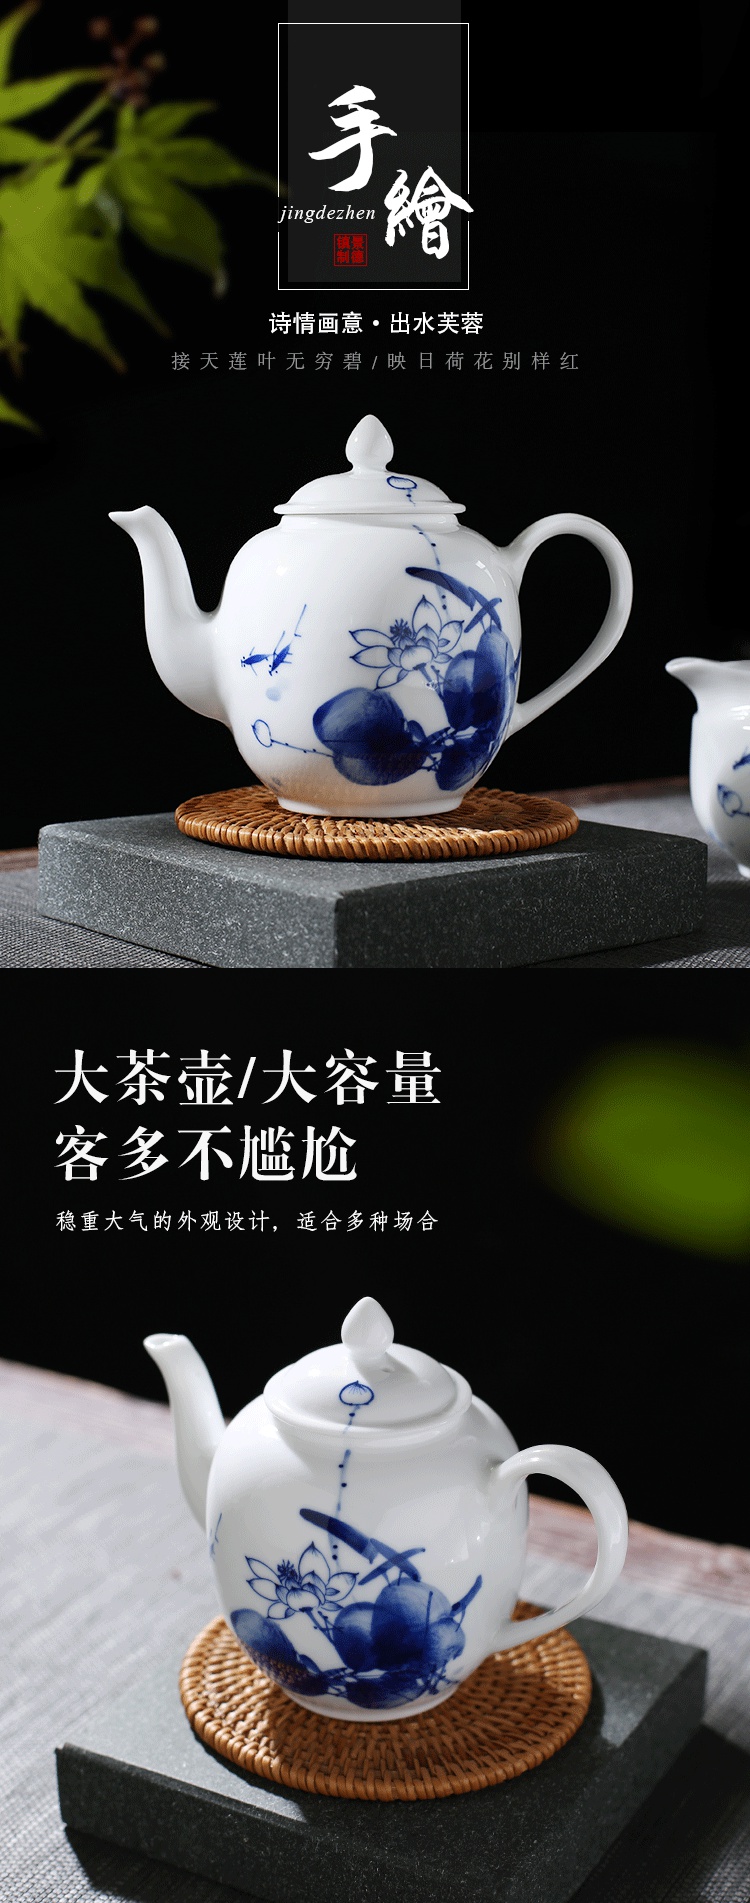 Poly real scene of jingdezhen ceramic teapot high - capacity hand - made filtering of blue and white porcelain household kung fu single pot Chinese teapot